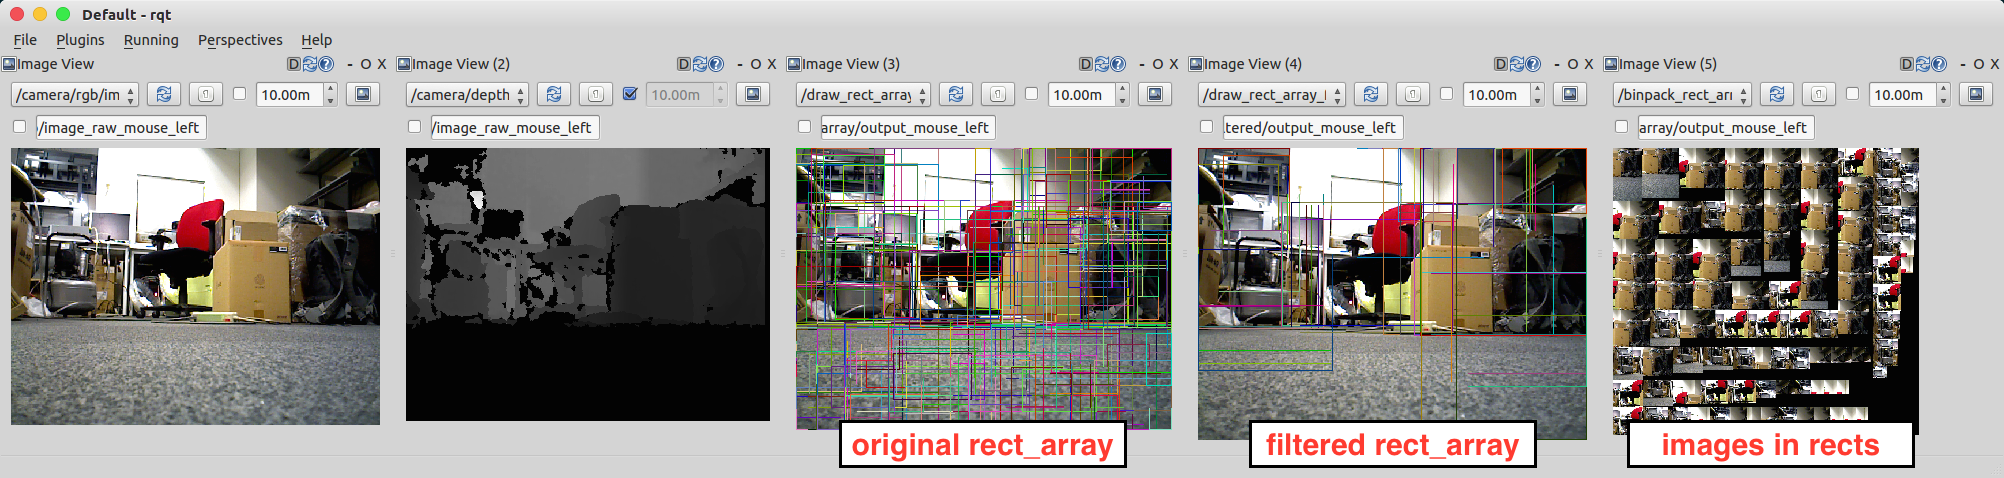 ../../_images/rect_array_actual_size_filter.png